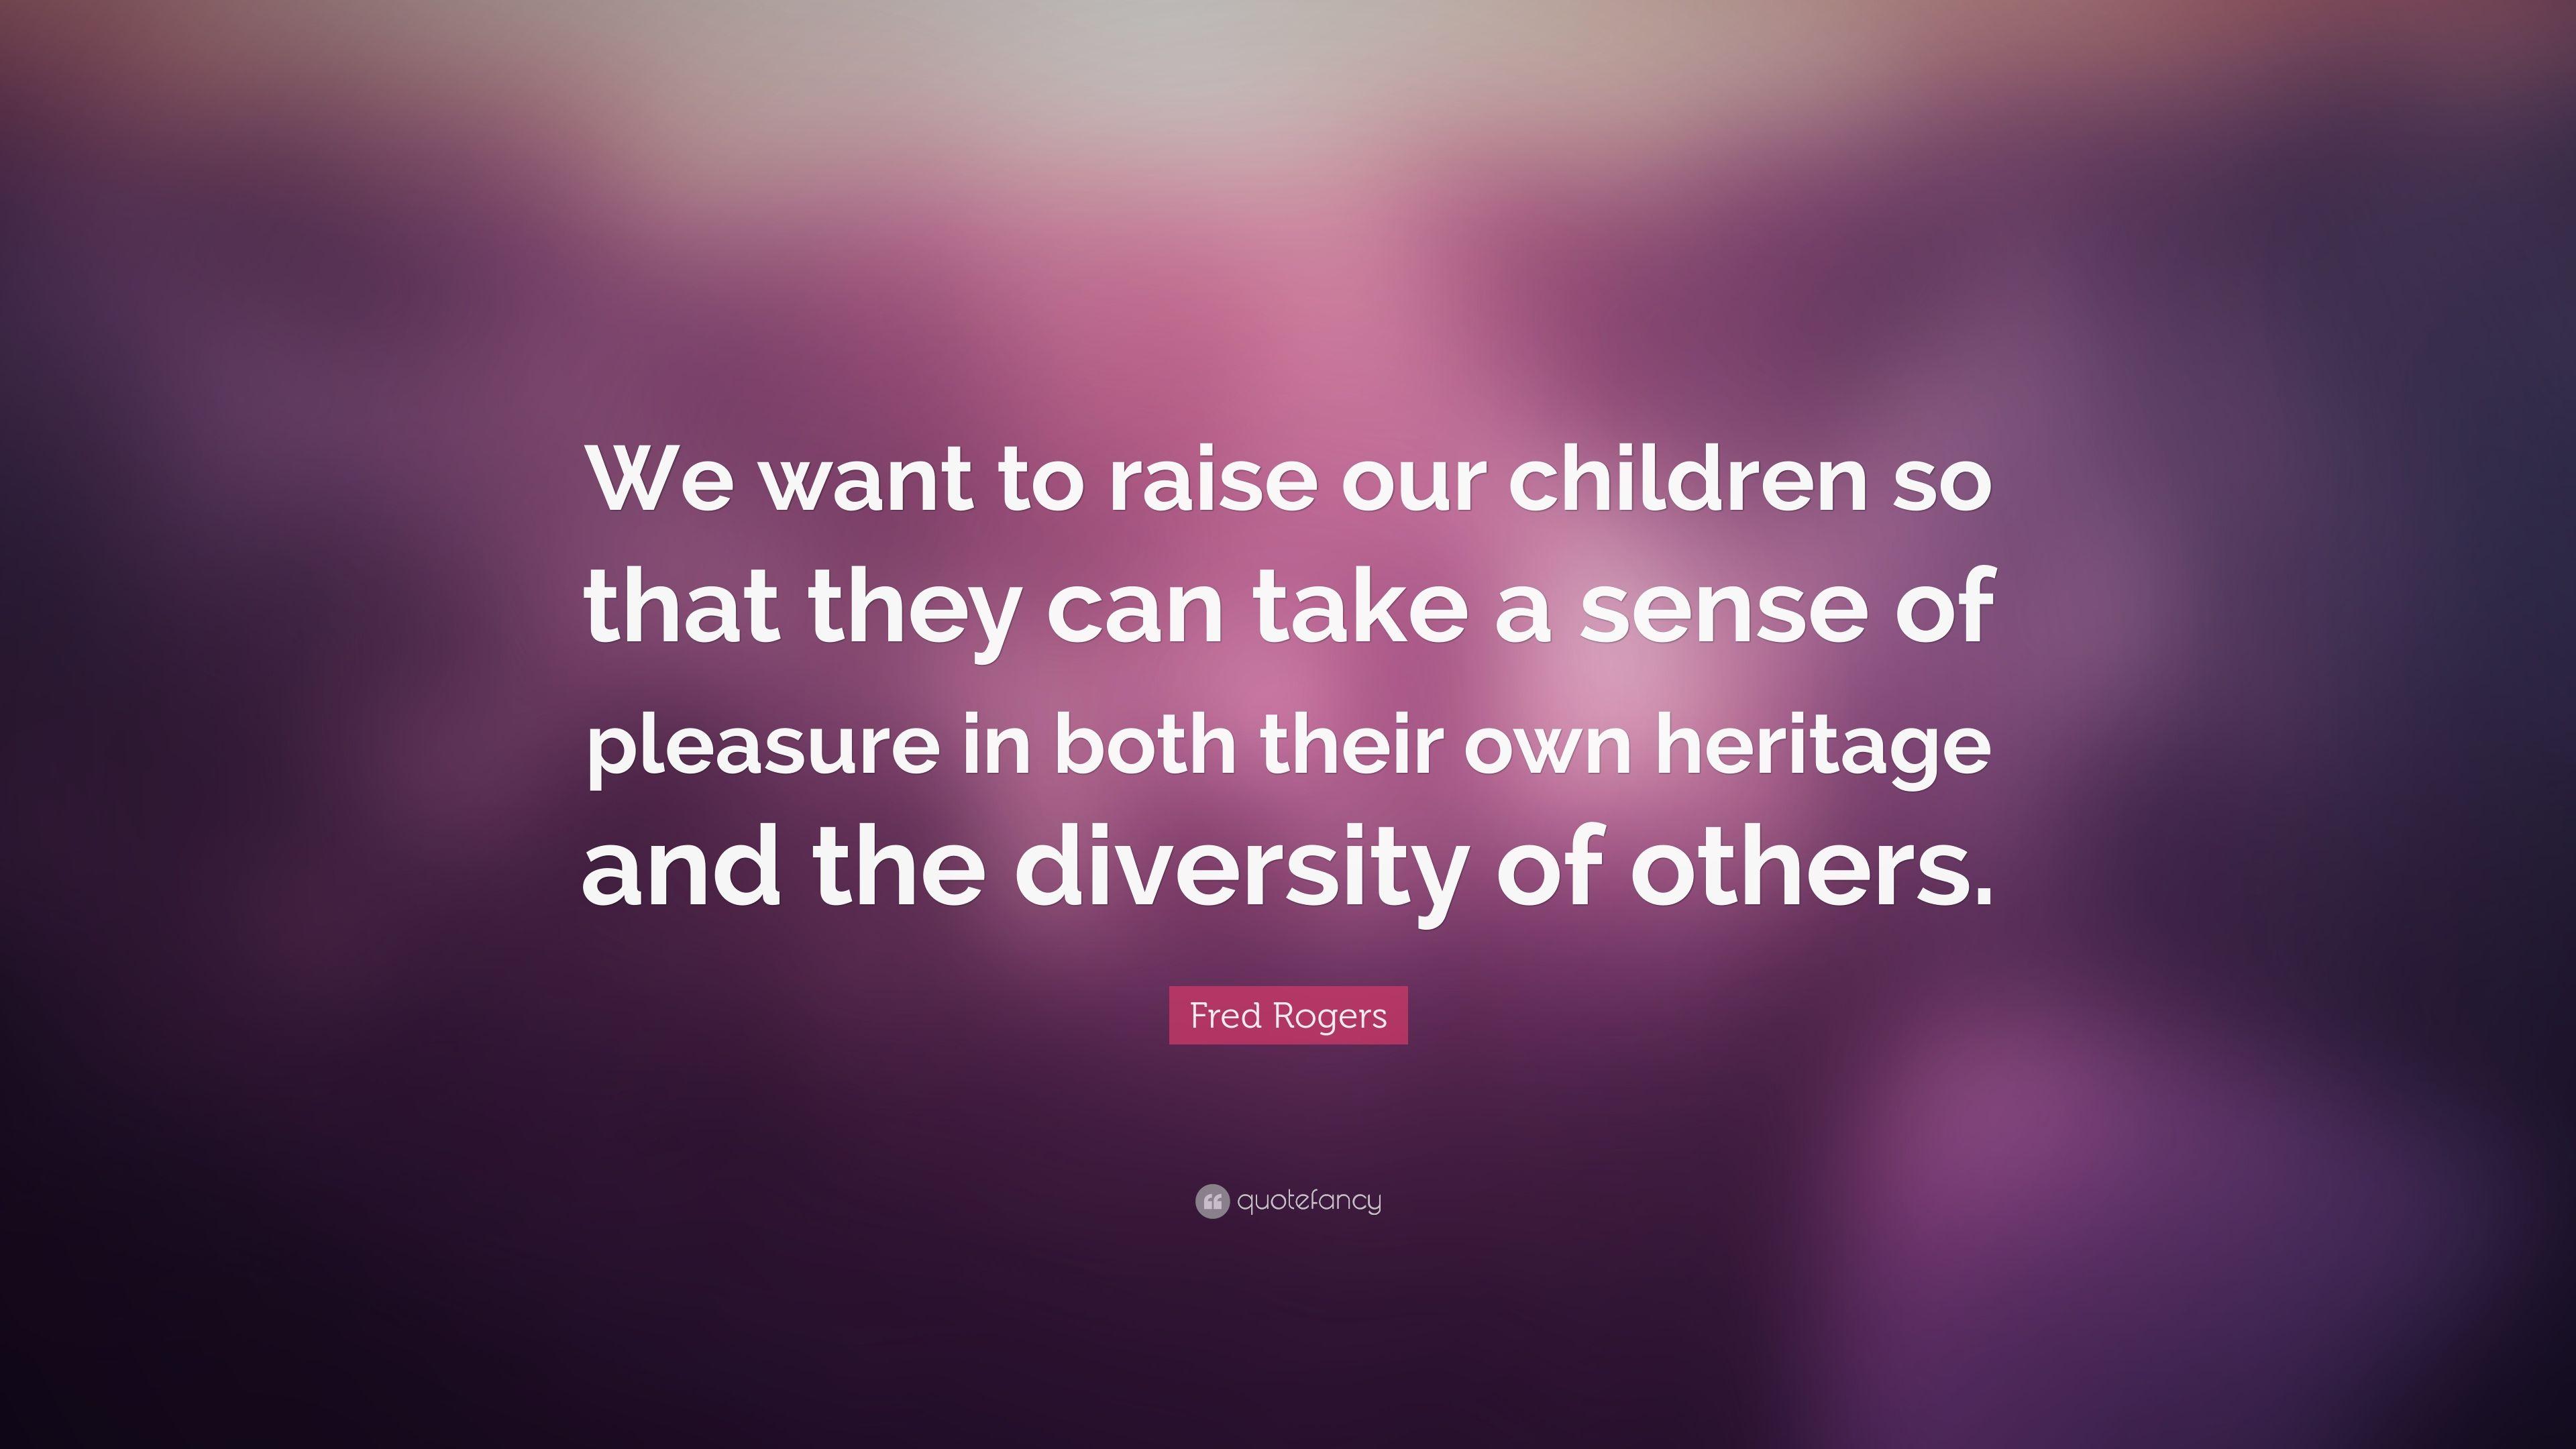 Fred Rogers Quote: “We want to raise our children so that they can